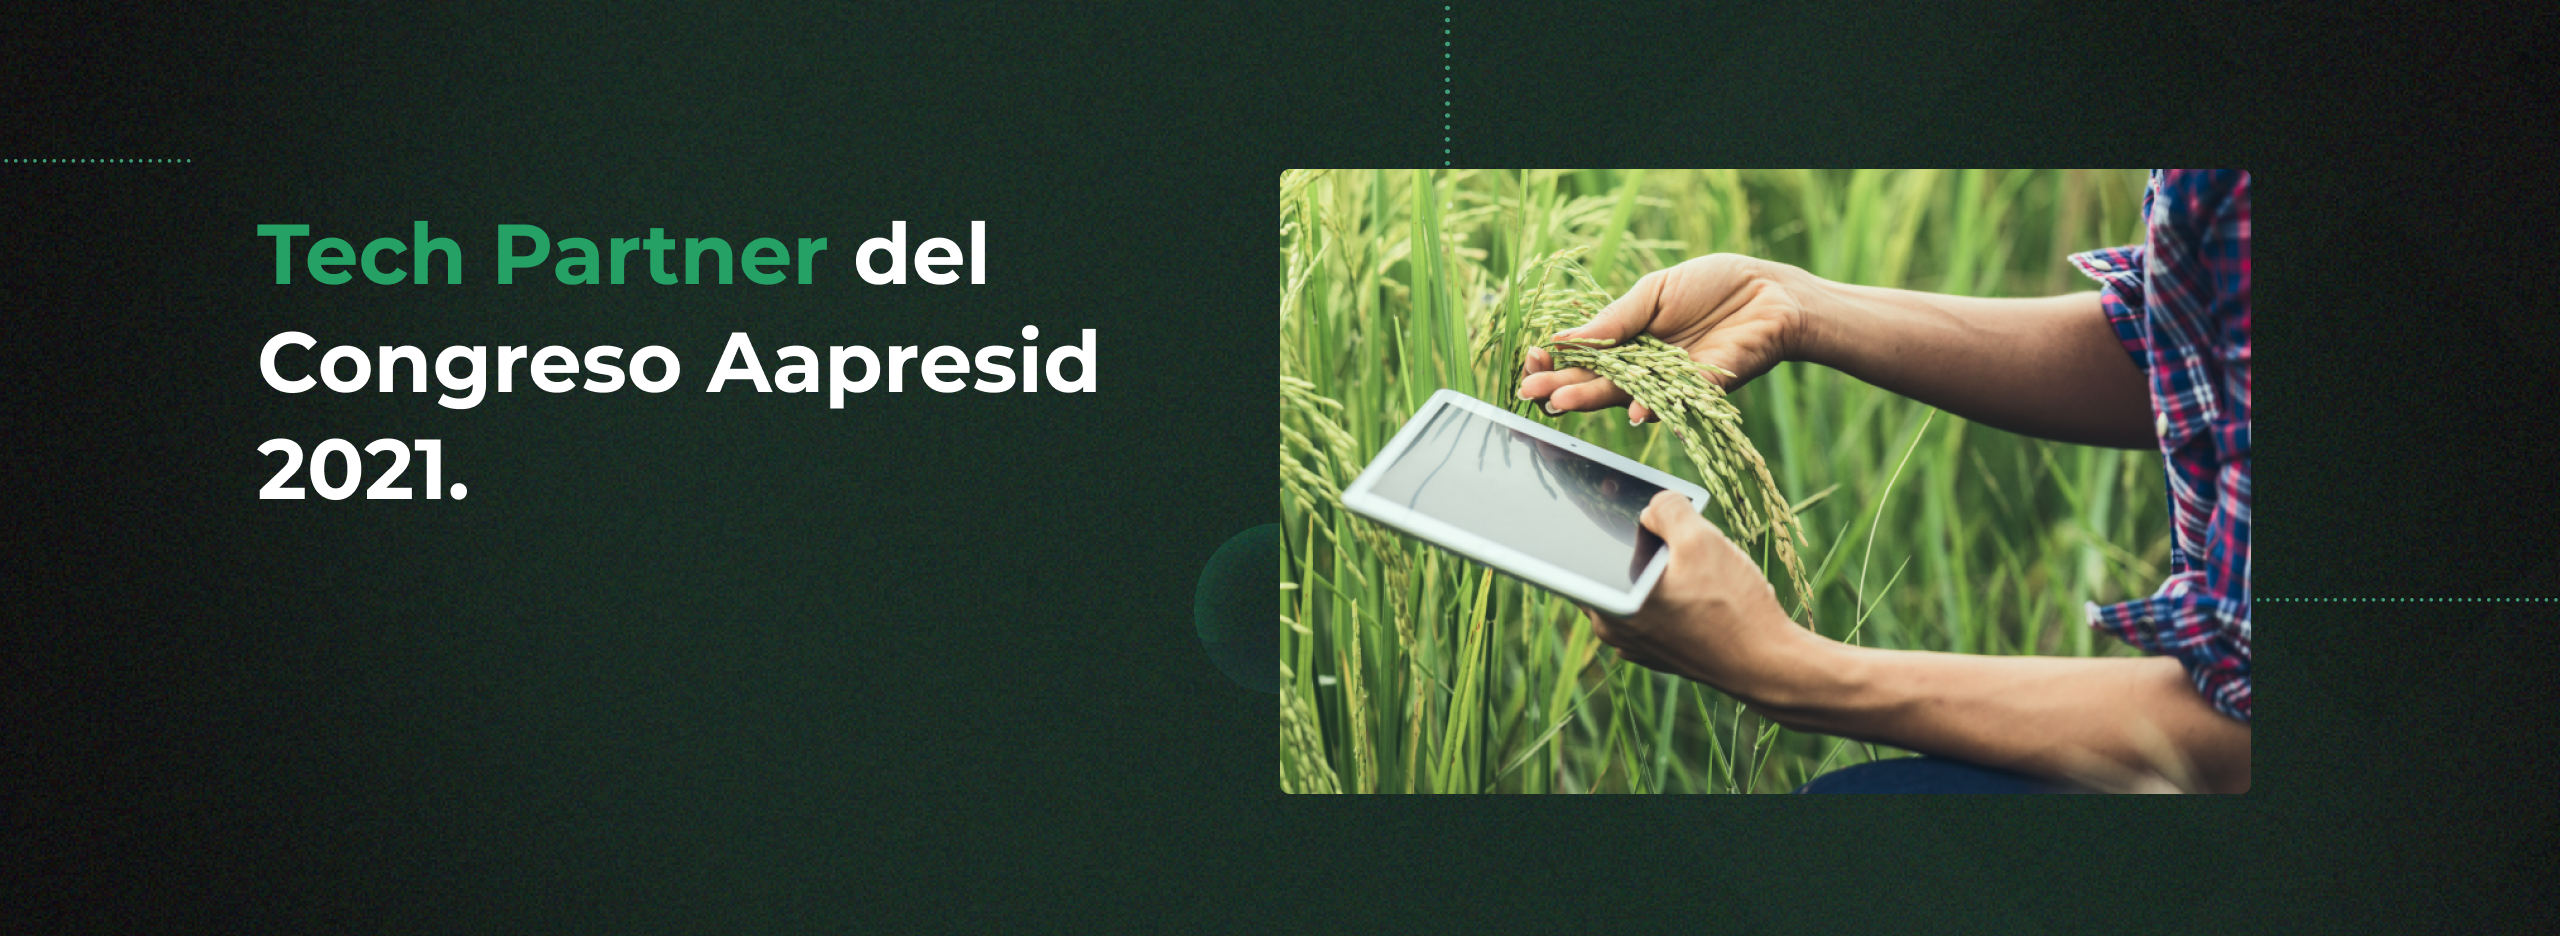 Aapresid Congress 2021: we accompanied the great event of agriculture through technology